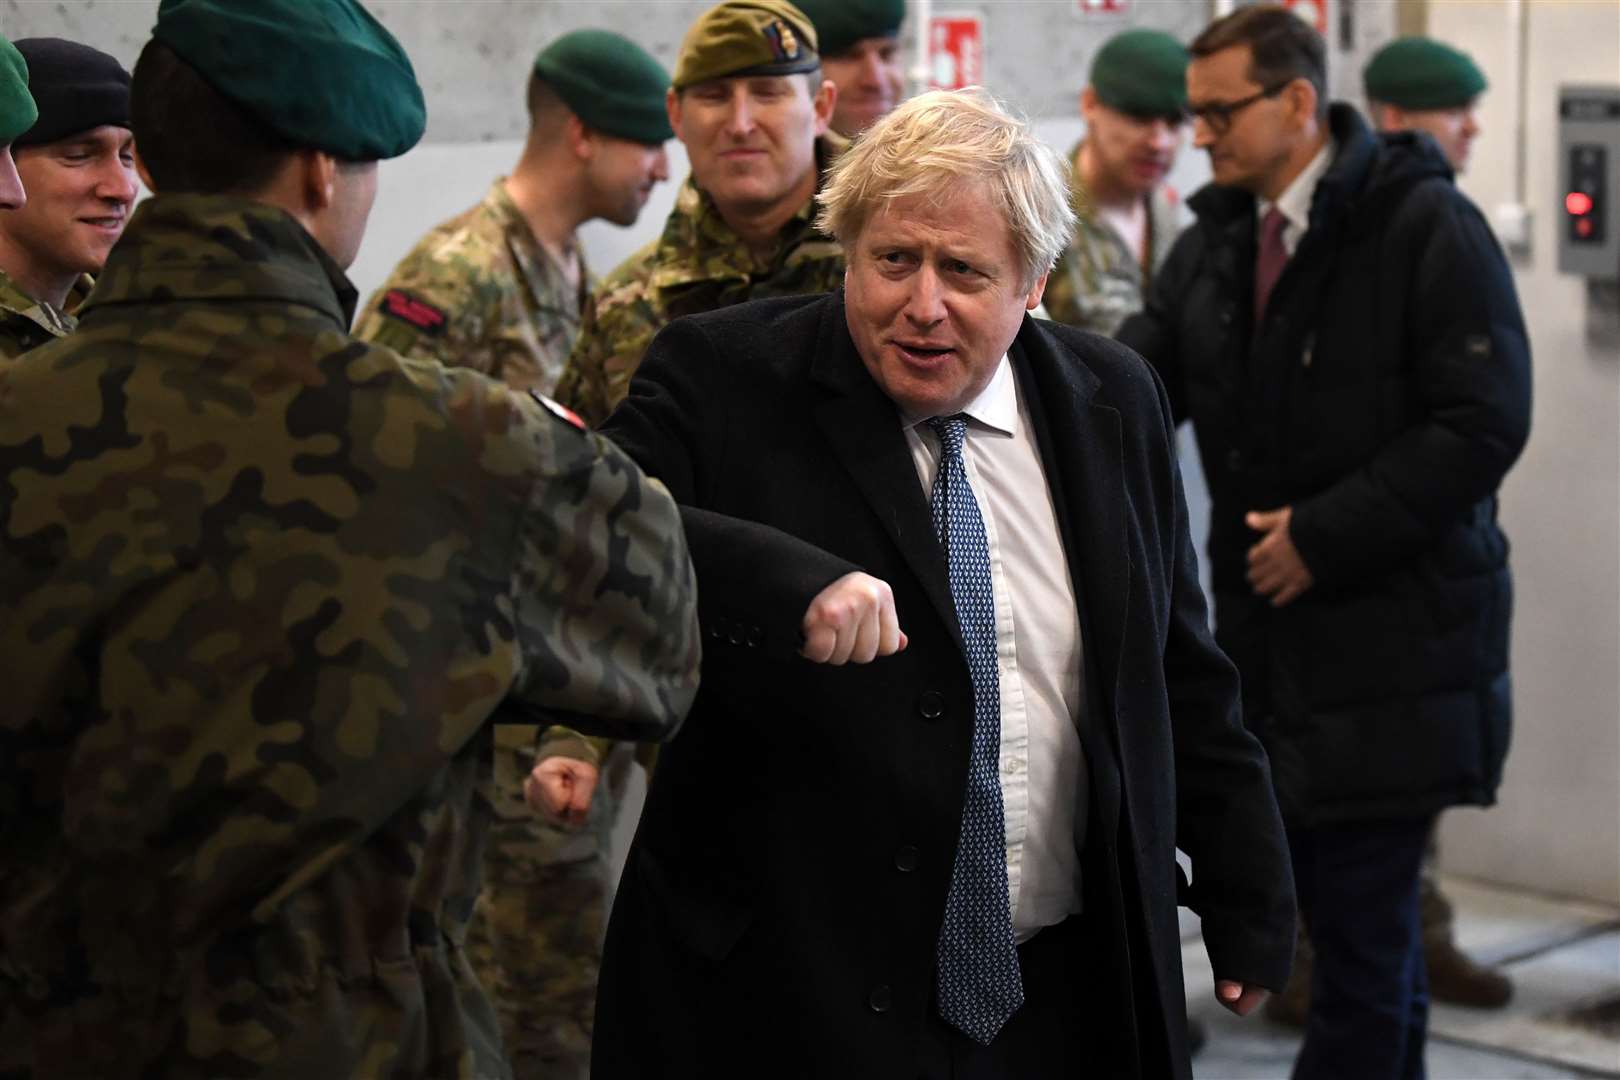 Prime Minister Boris Johnson greets troops during a visit Warsaw (Daniel Leal/PA)